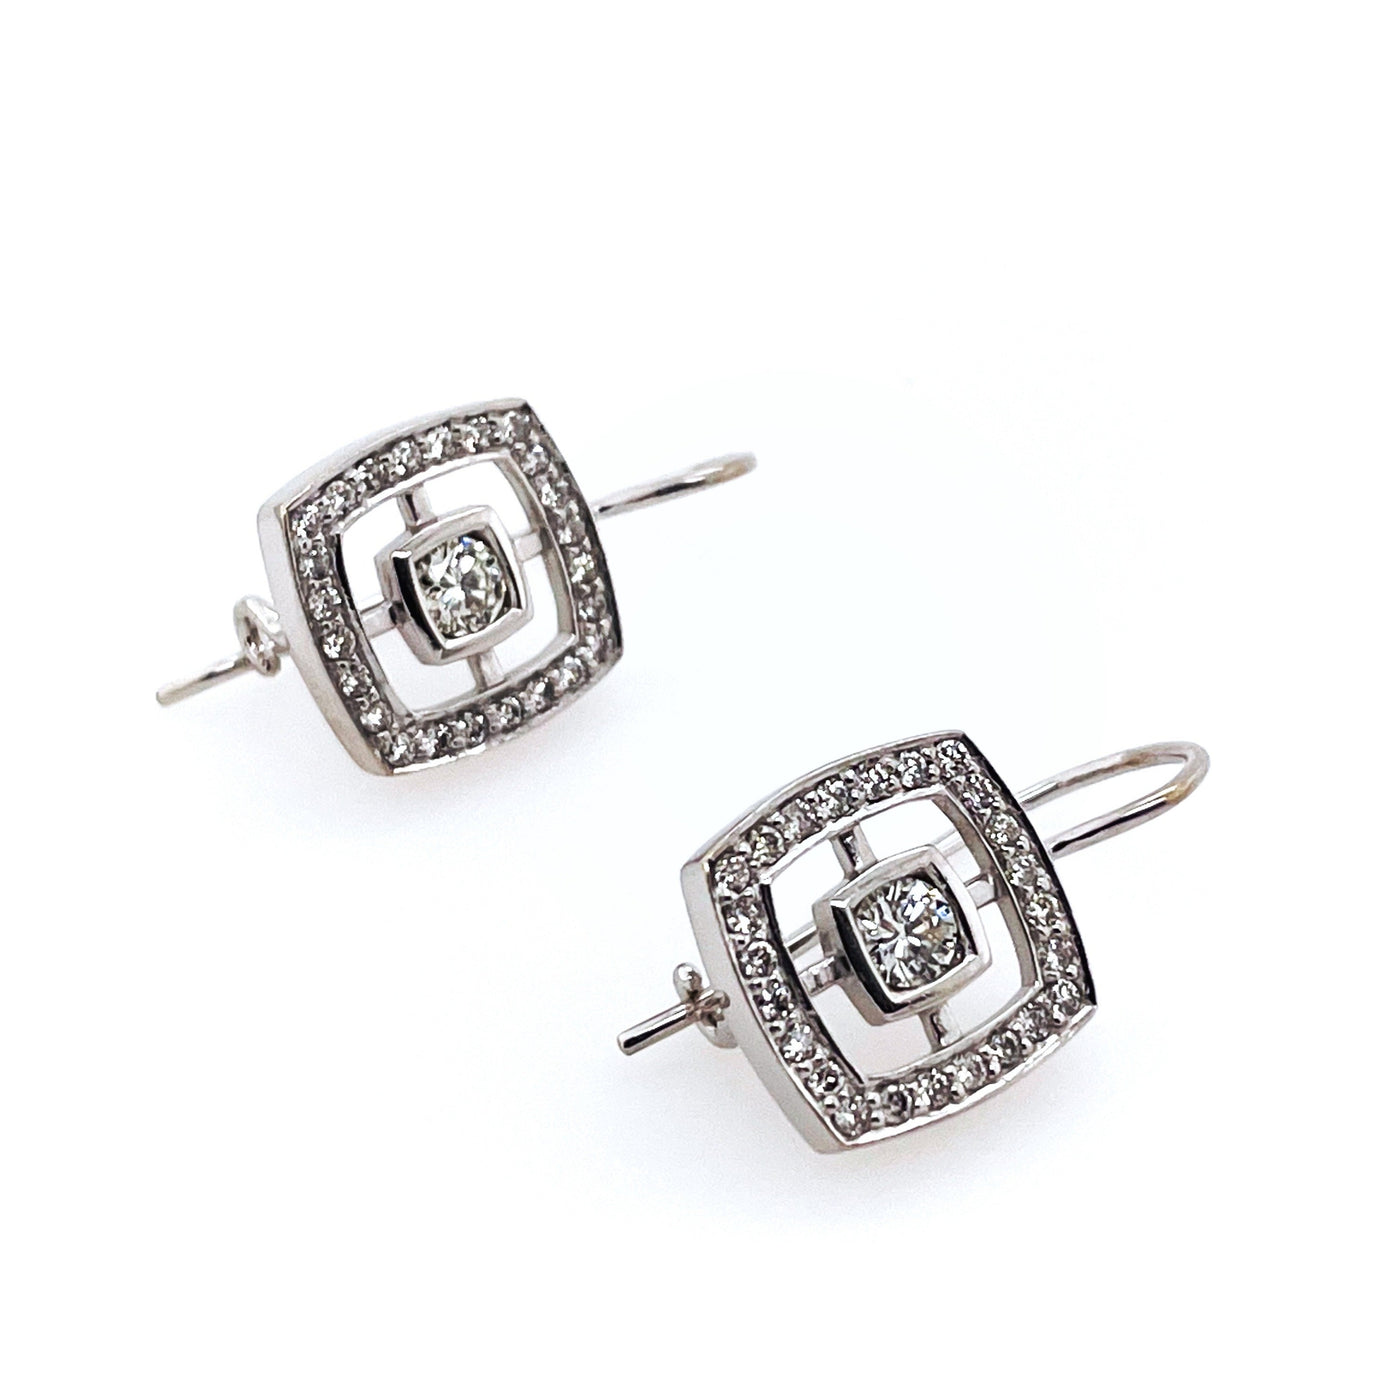 9ct White Gold and Diamond Drop Earrings - SOLD OUT